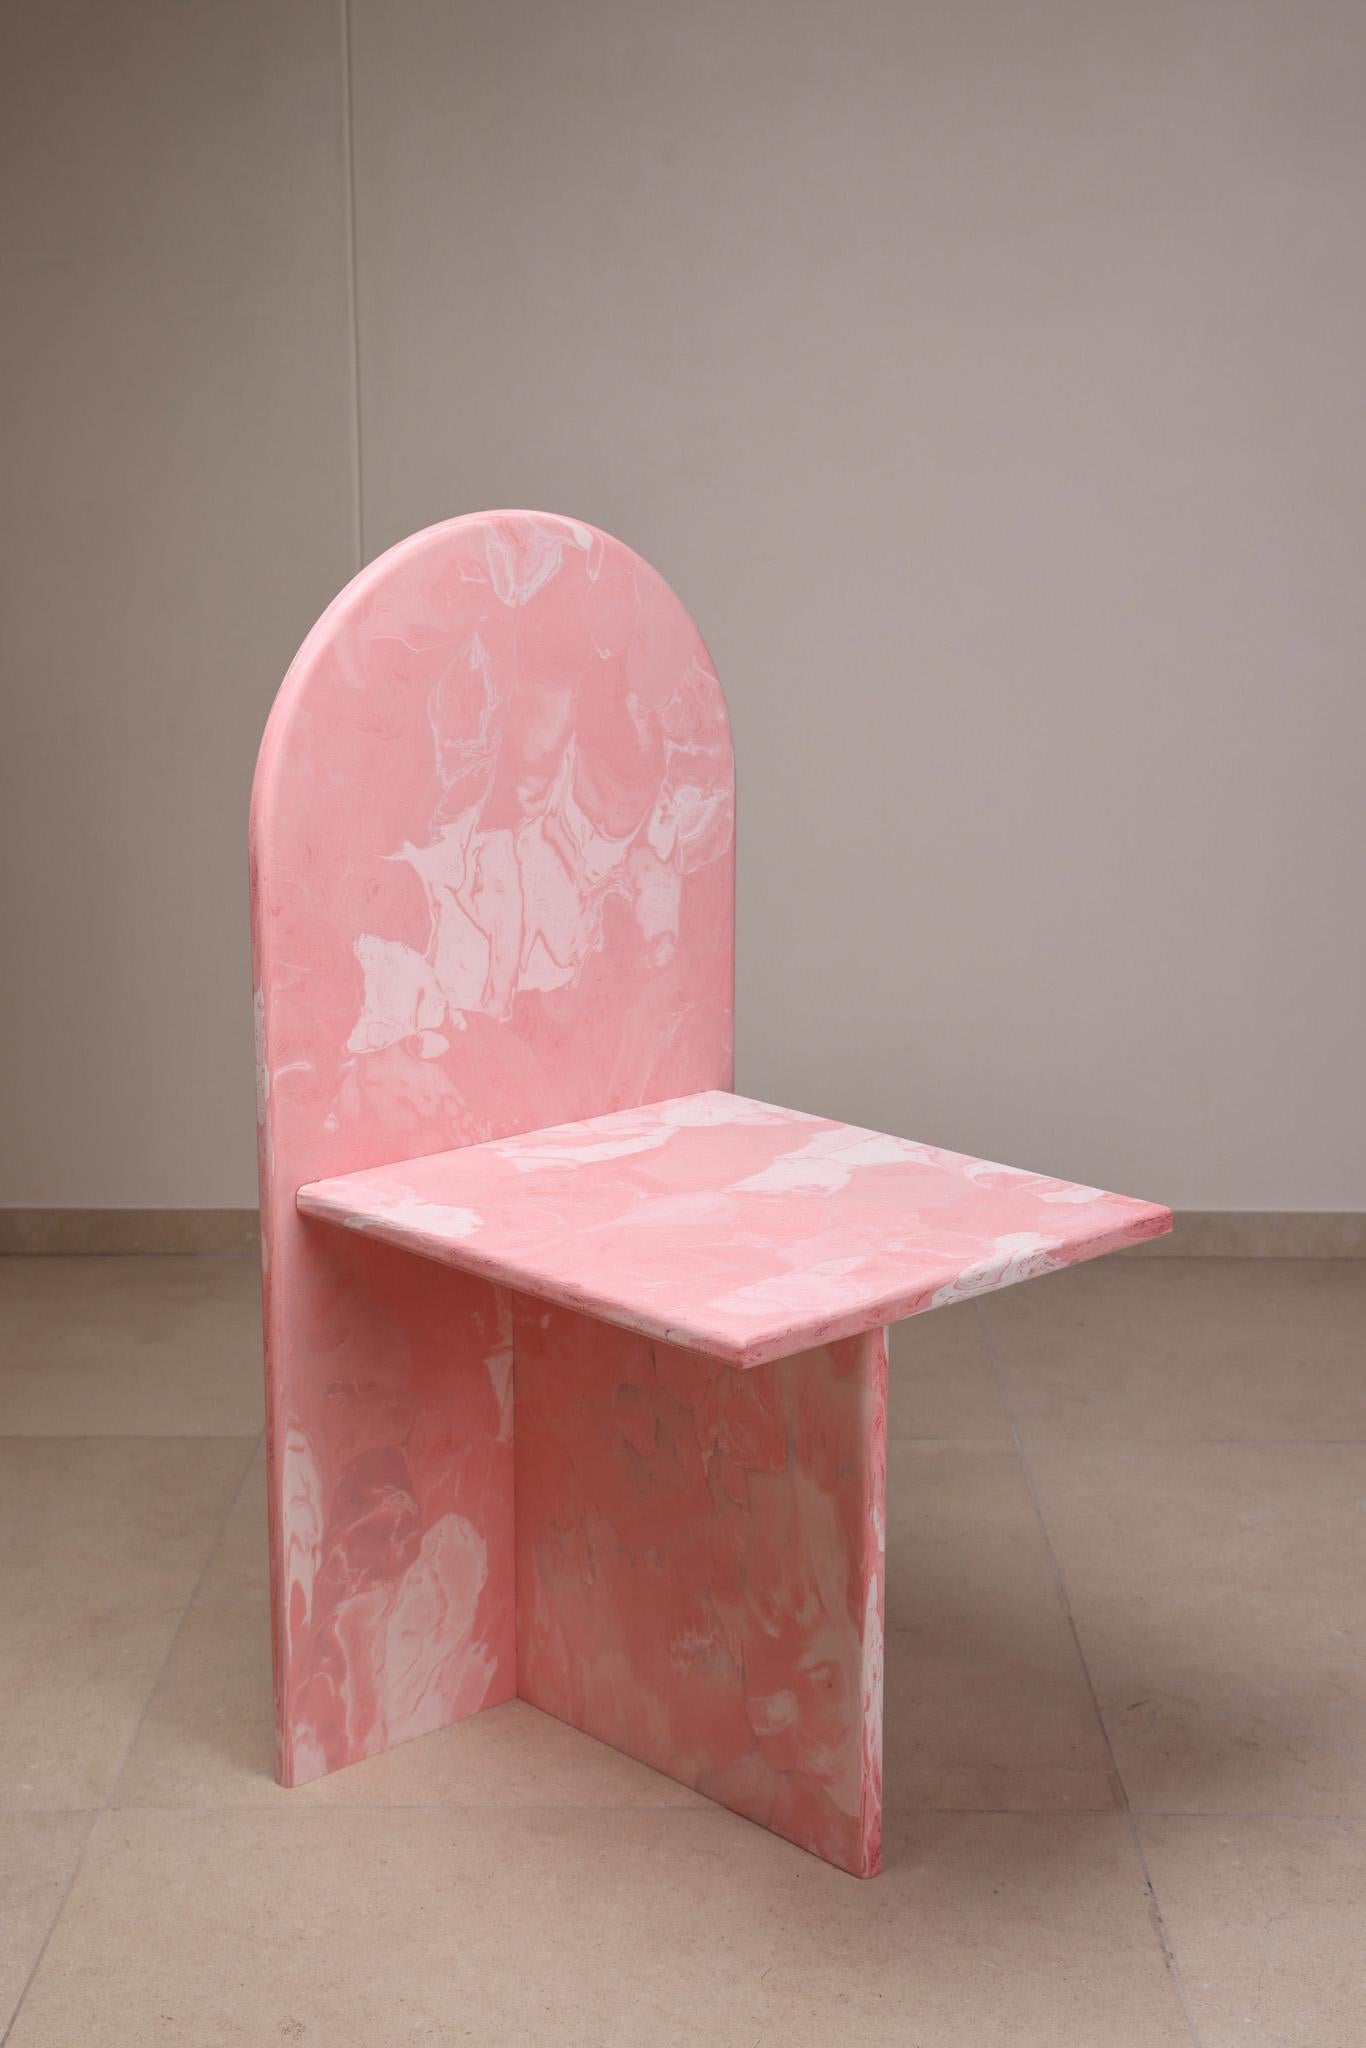 4x Contemporary Chairs Pink 100% Recycled Plastic Hand-Crafted by Anqa Studios For Sale 3